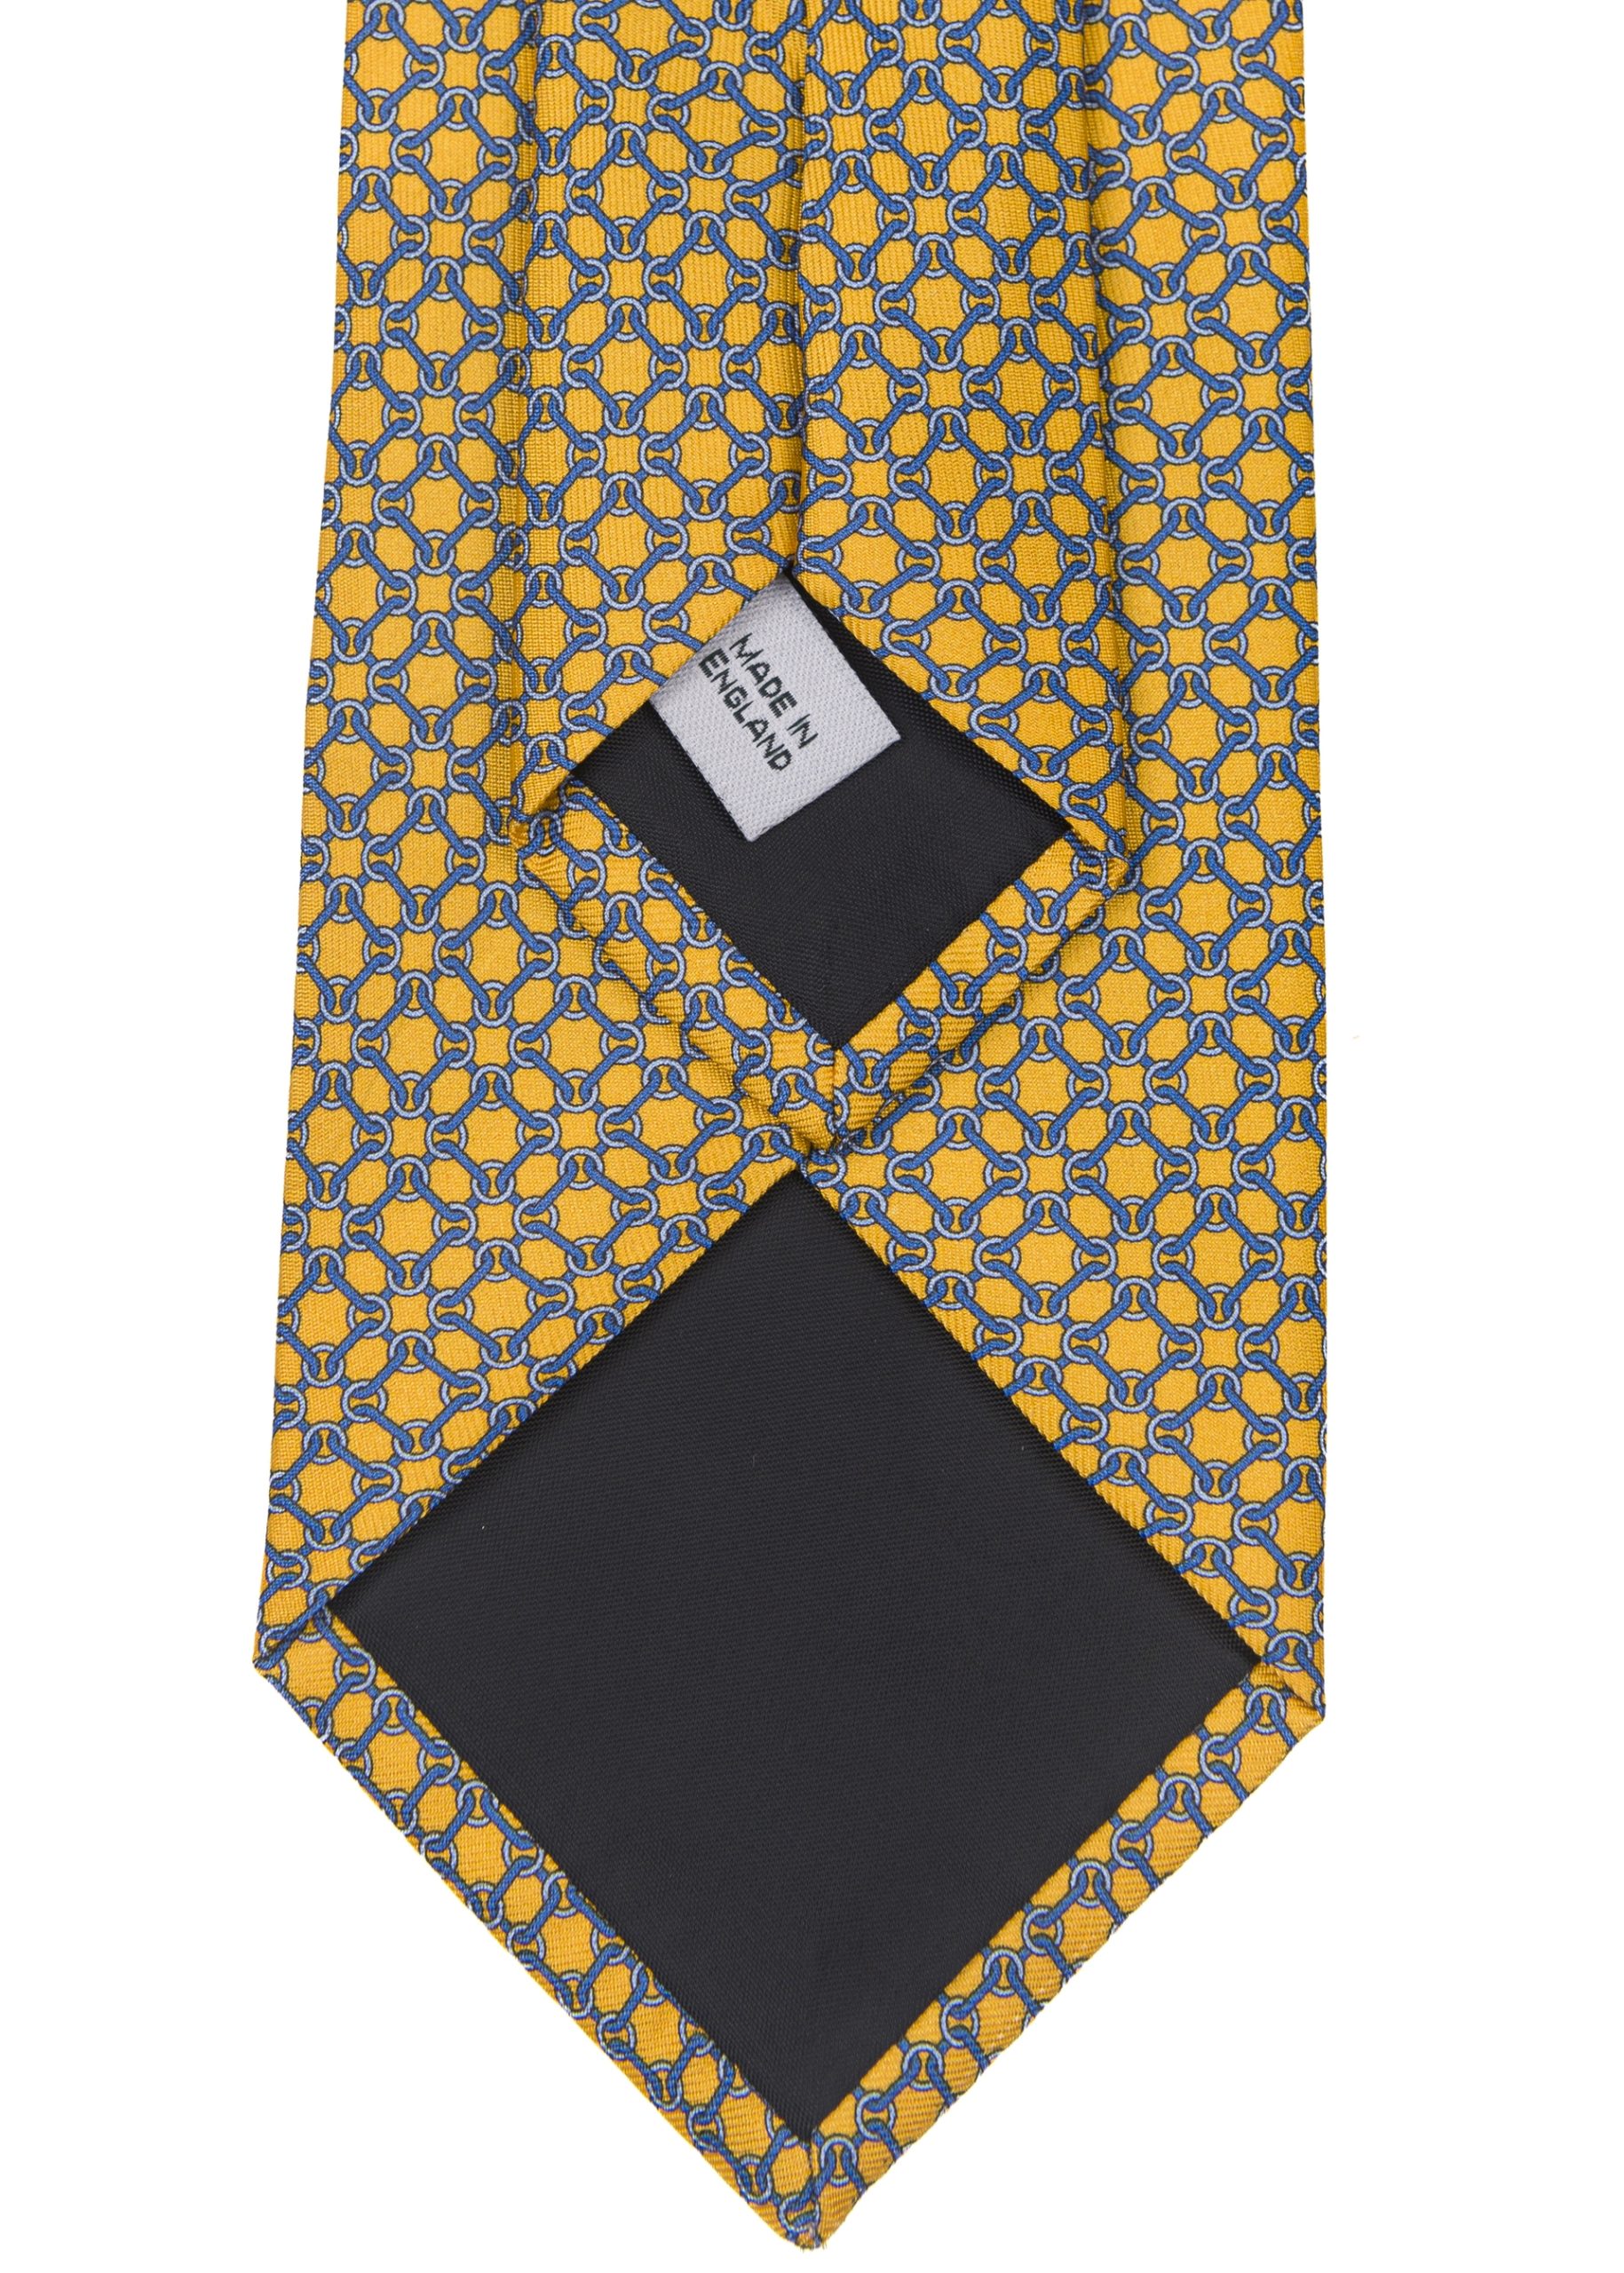 Roderick Charles men’s business tie in yellow and blue